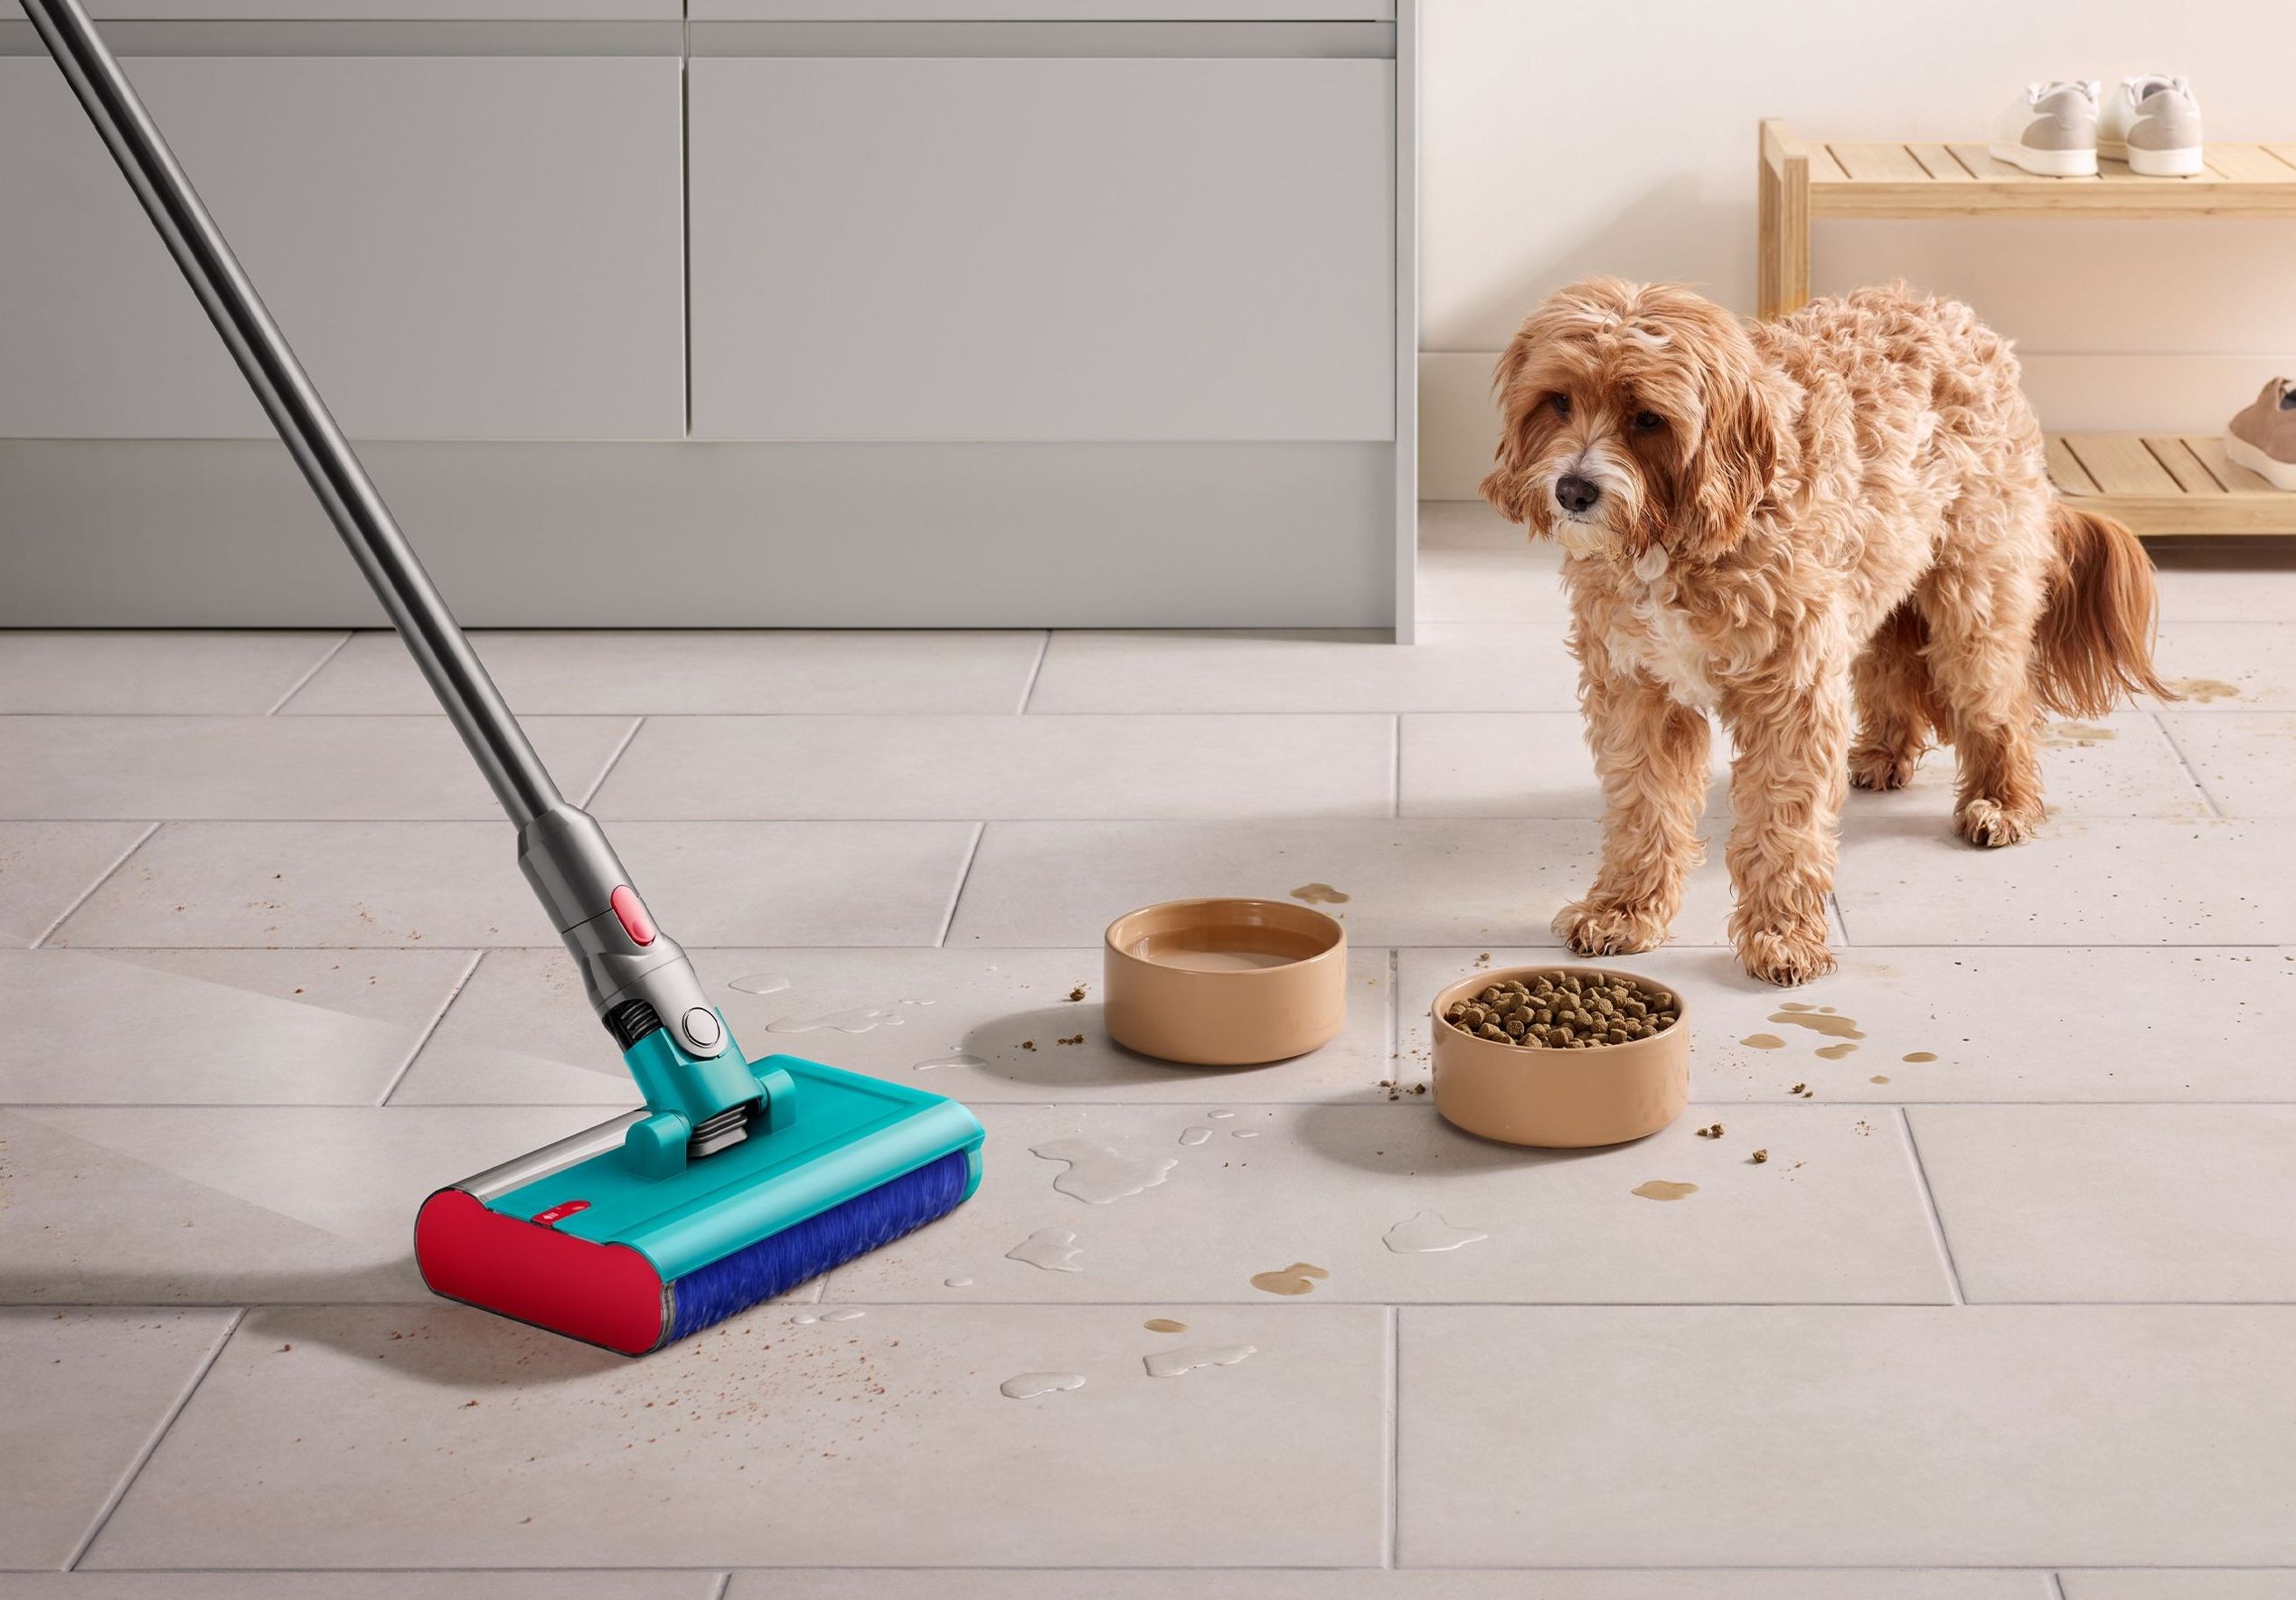 dyson v15 detect submarine shown mopping a spill on the floor while a pet dog looks on